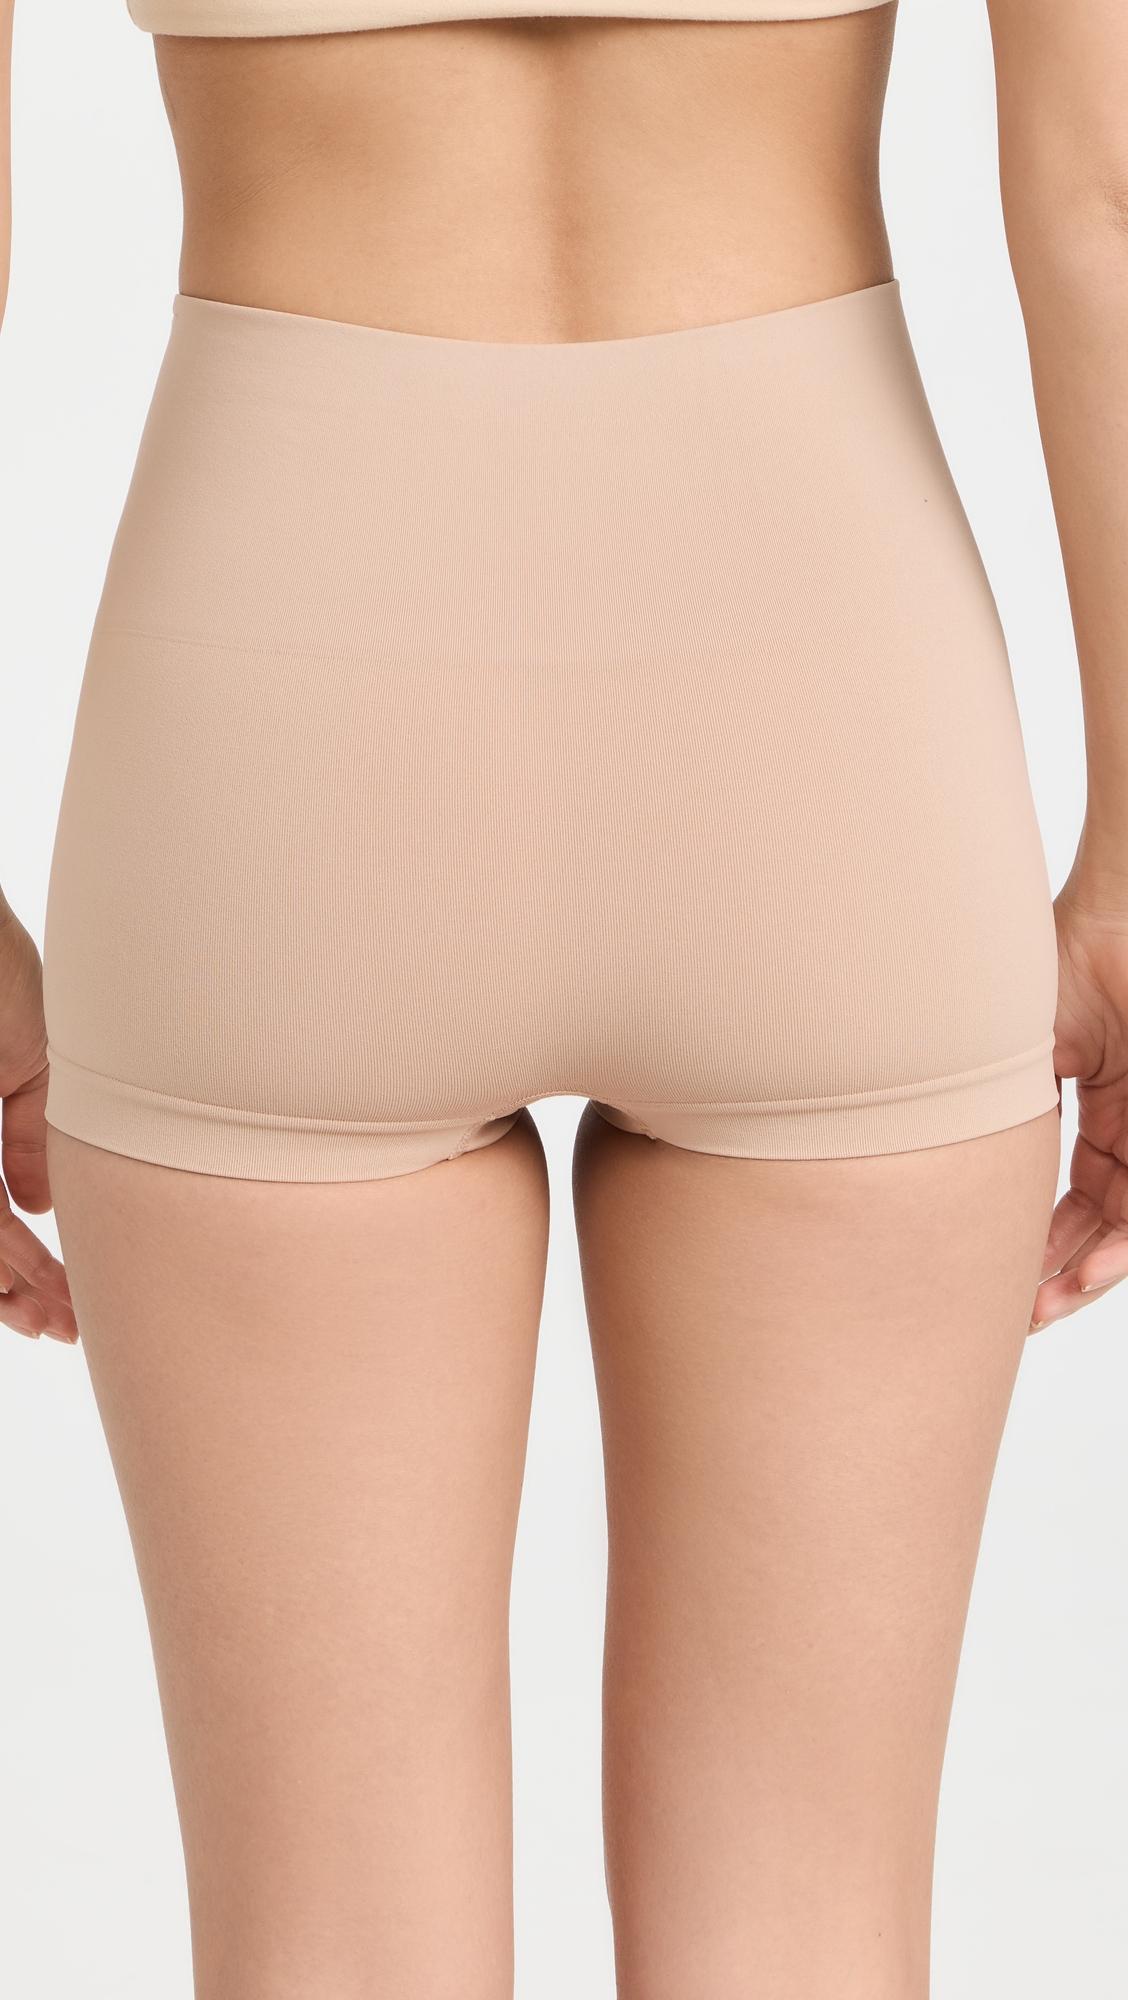 Spanx Boy Shorts Toasted Oatmea in Natural